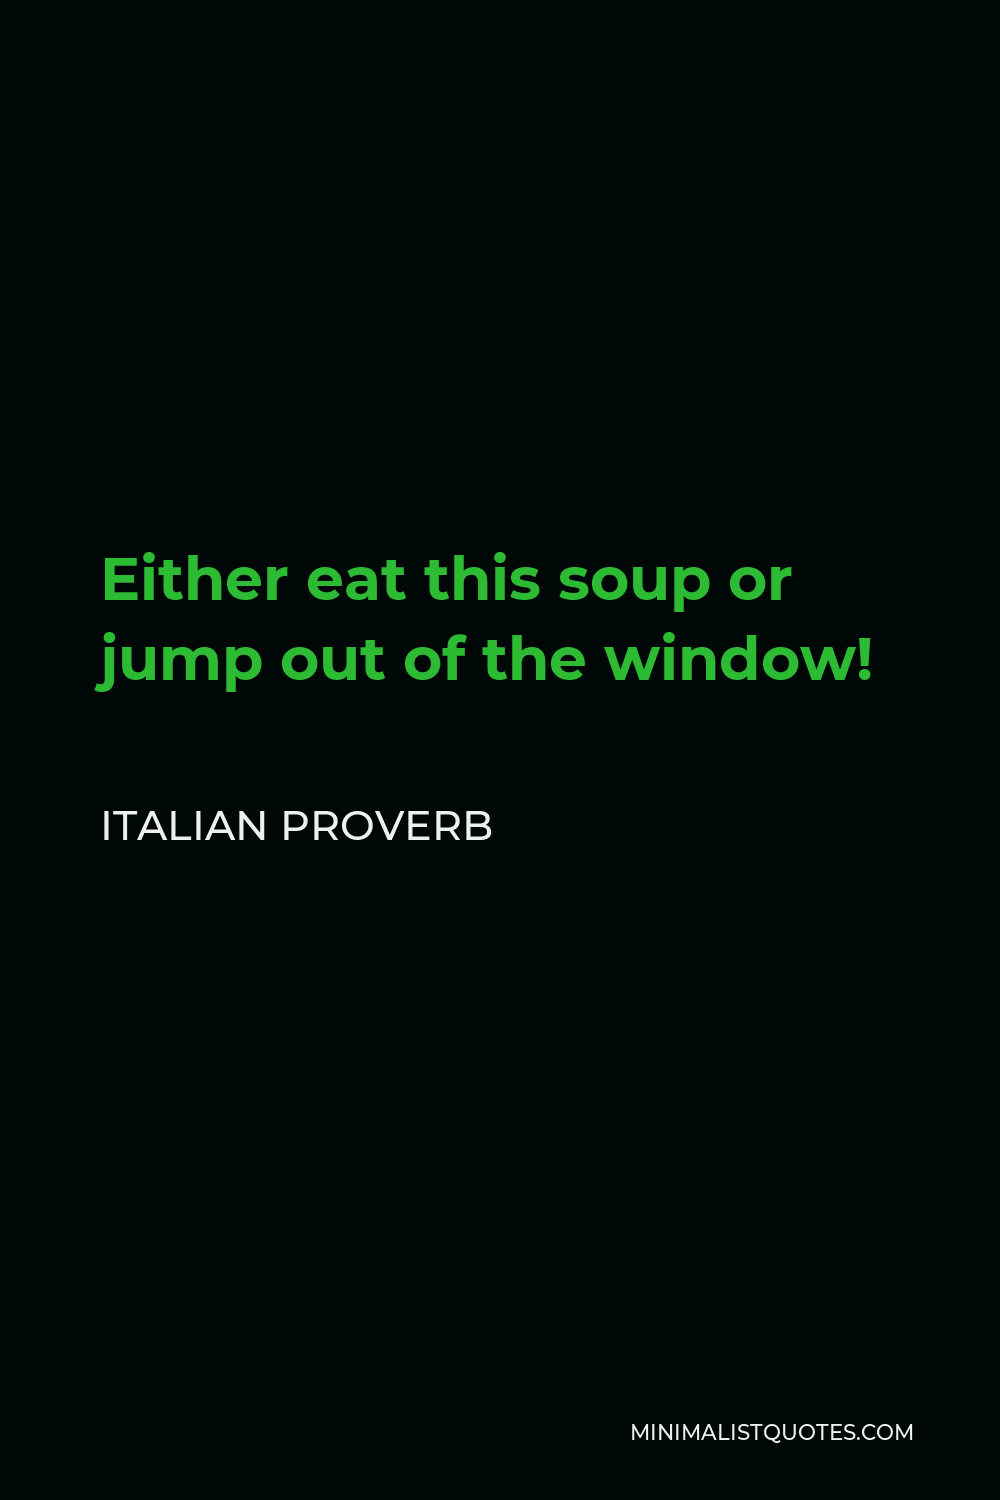 Italian Proverb Quote - Either eat this soup or jump out of the window!